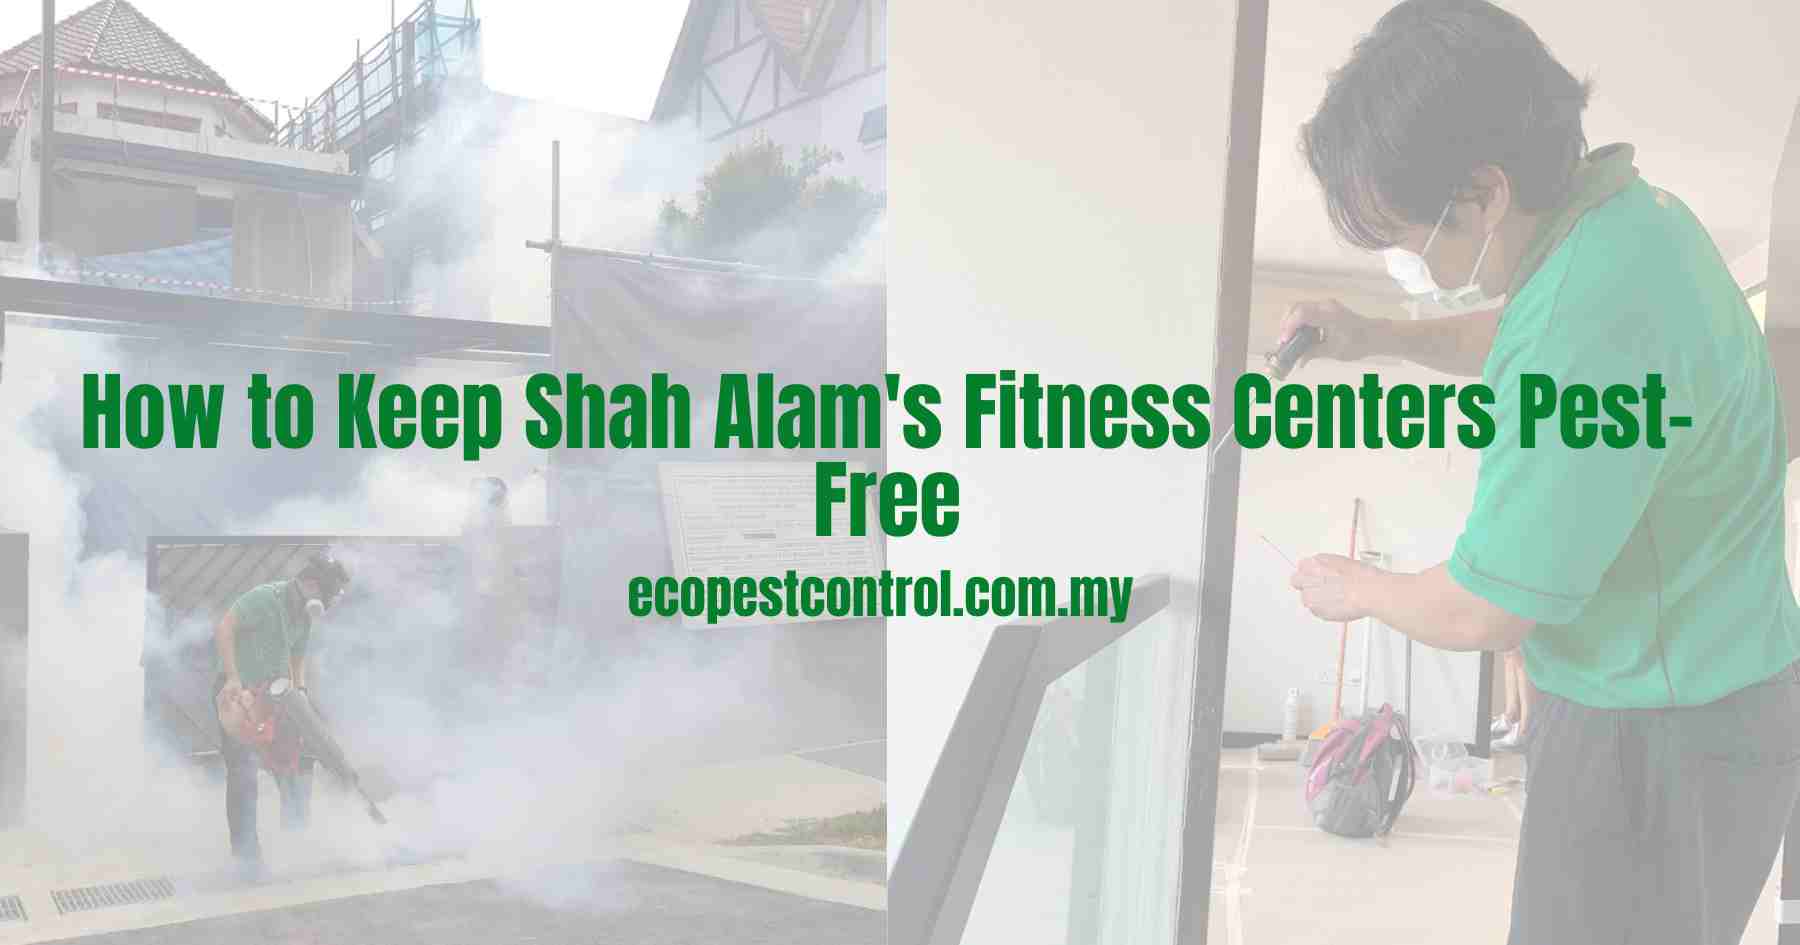 How to Keep Shah Alam's Sports Facilities Pest-Free